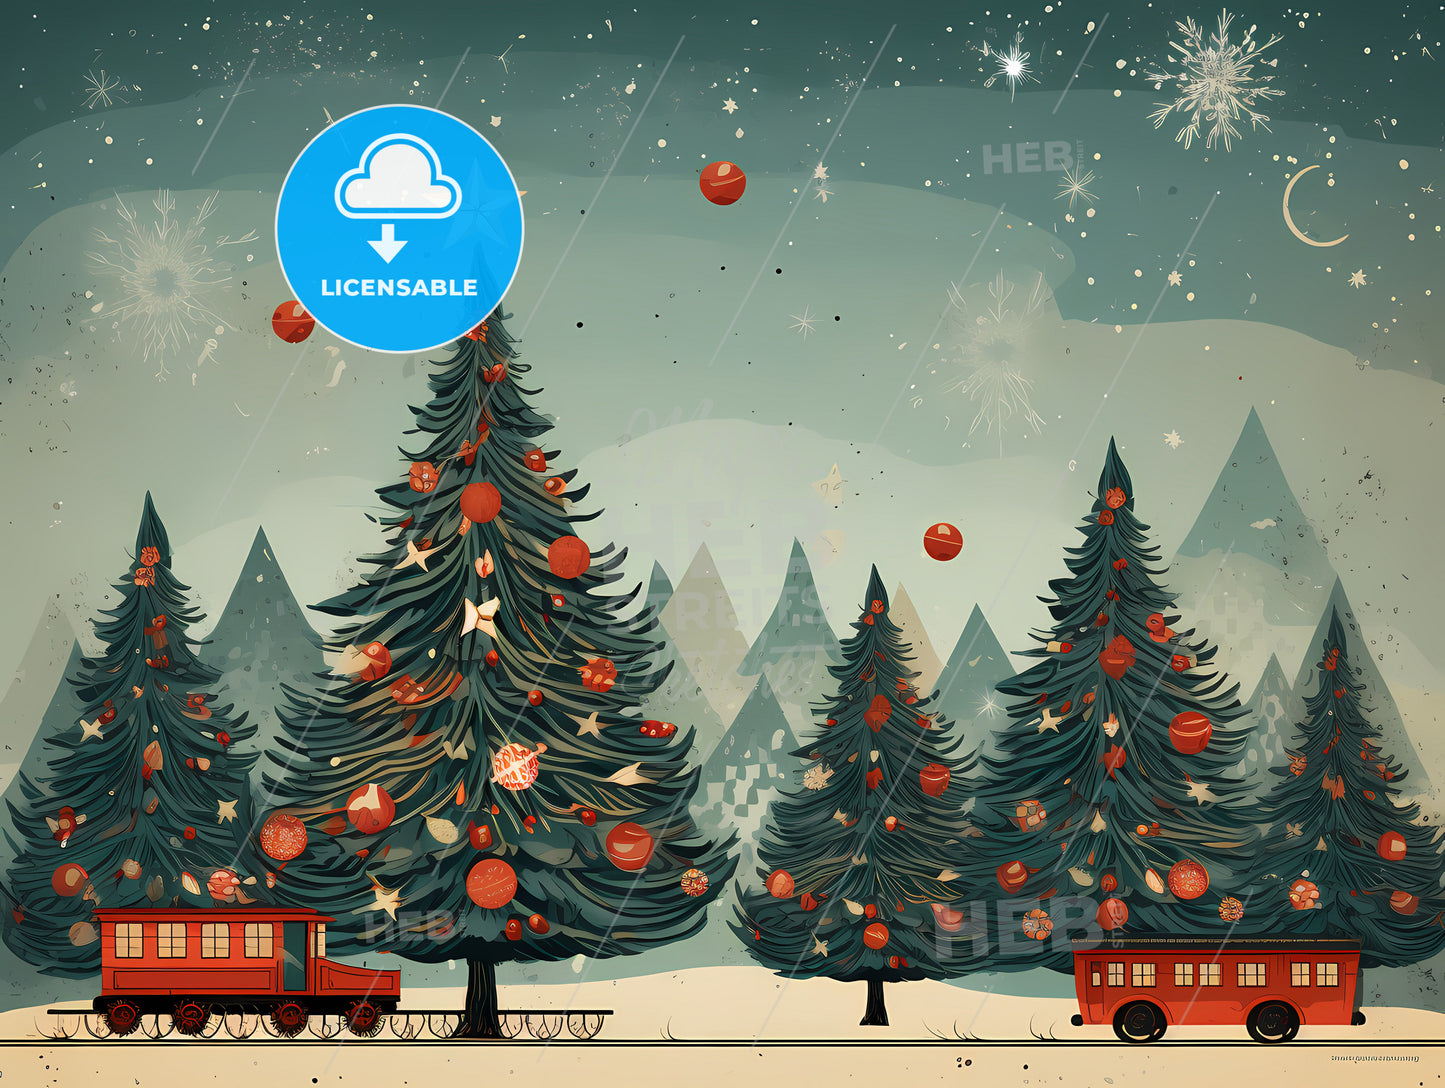 Christmas Greetings - A Train With A Decorated Tree